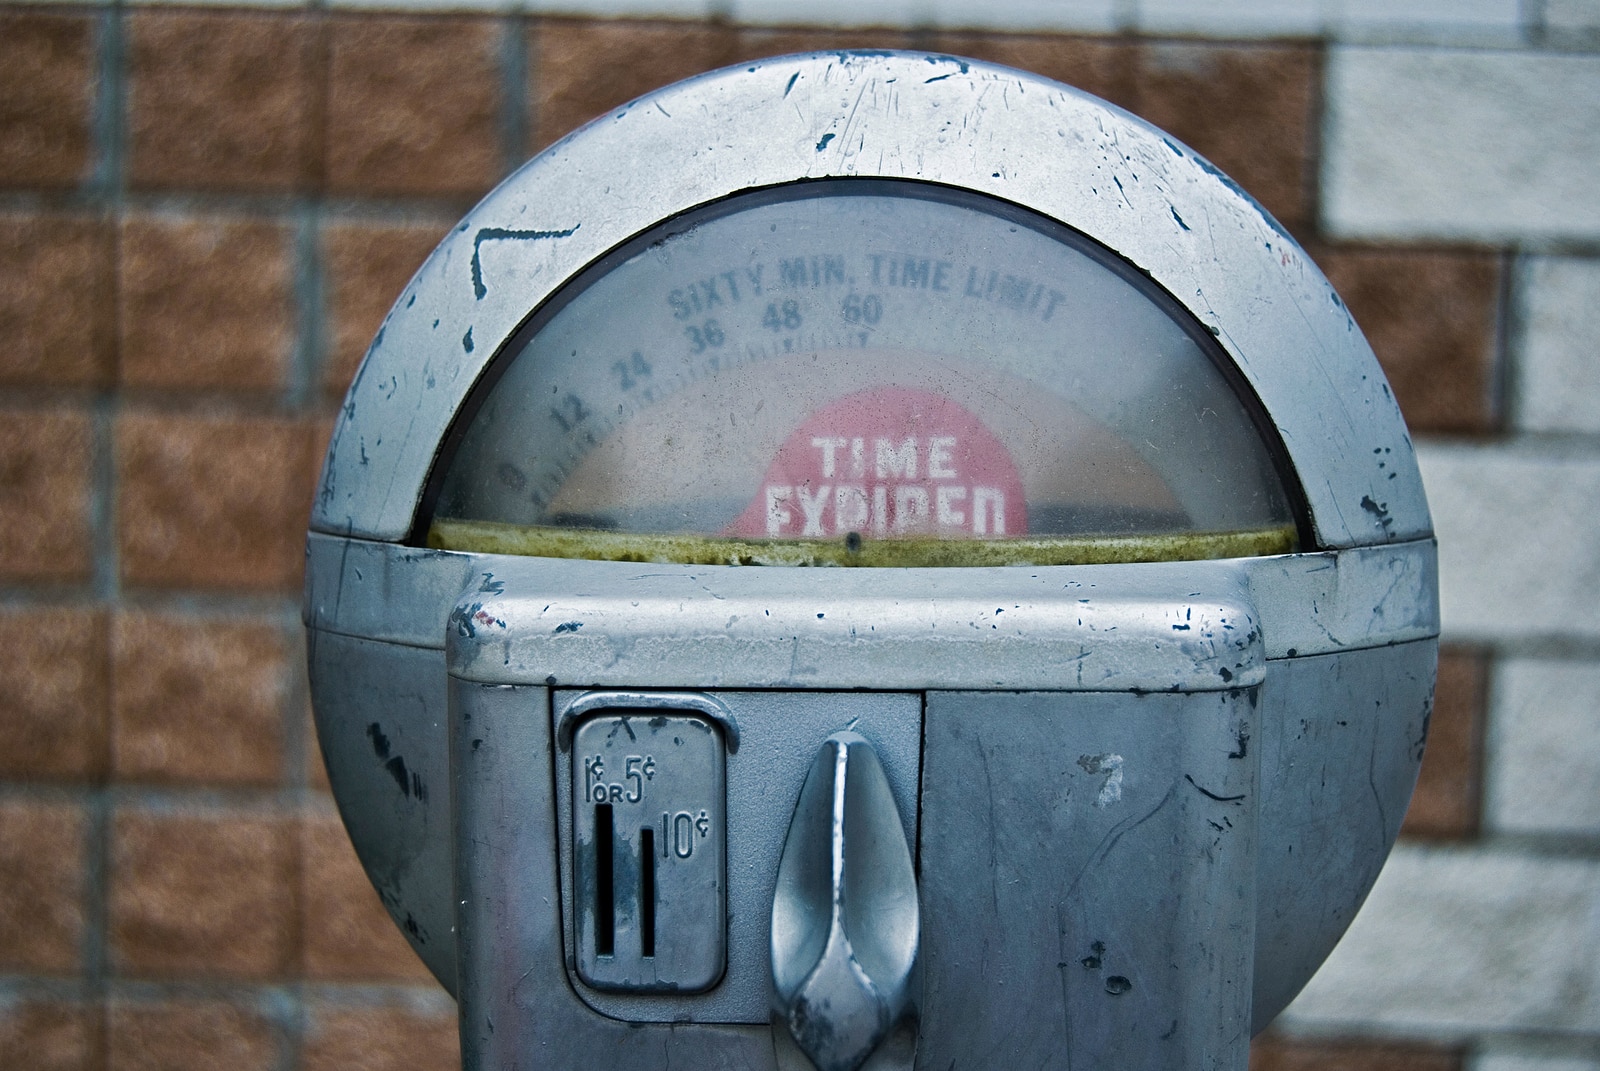 An old-fashioned meter with an expired sign.